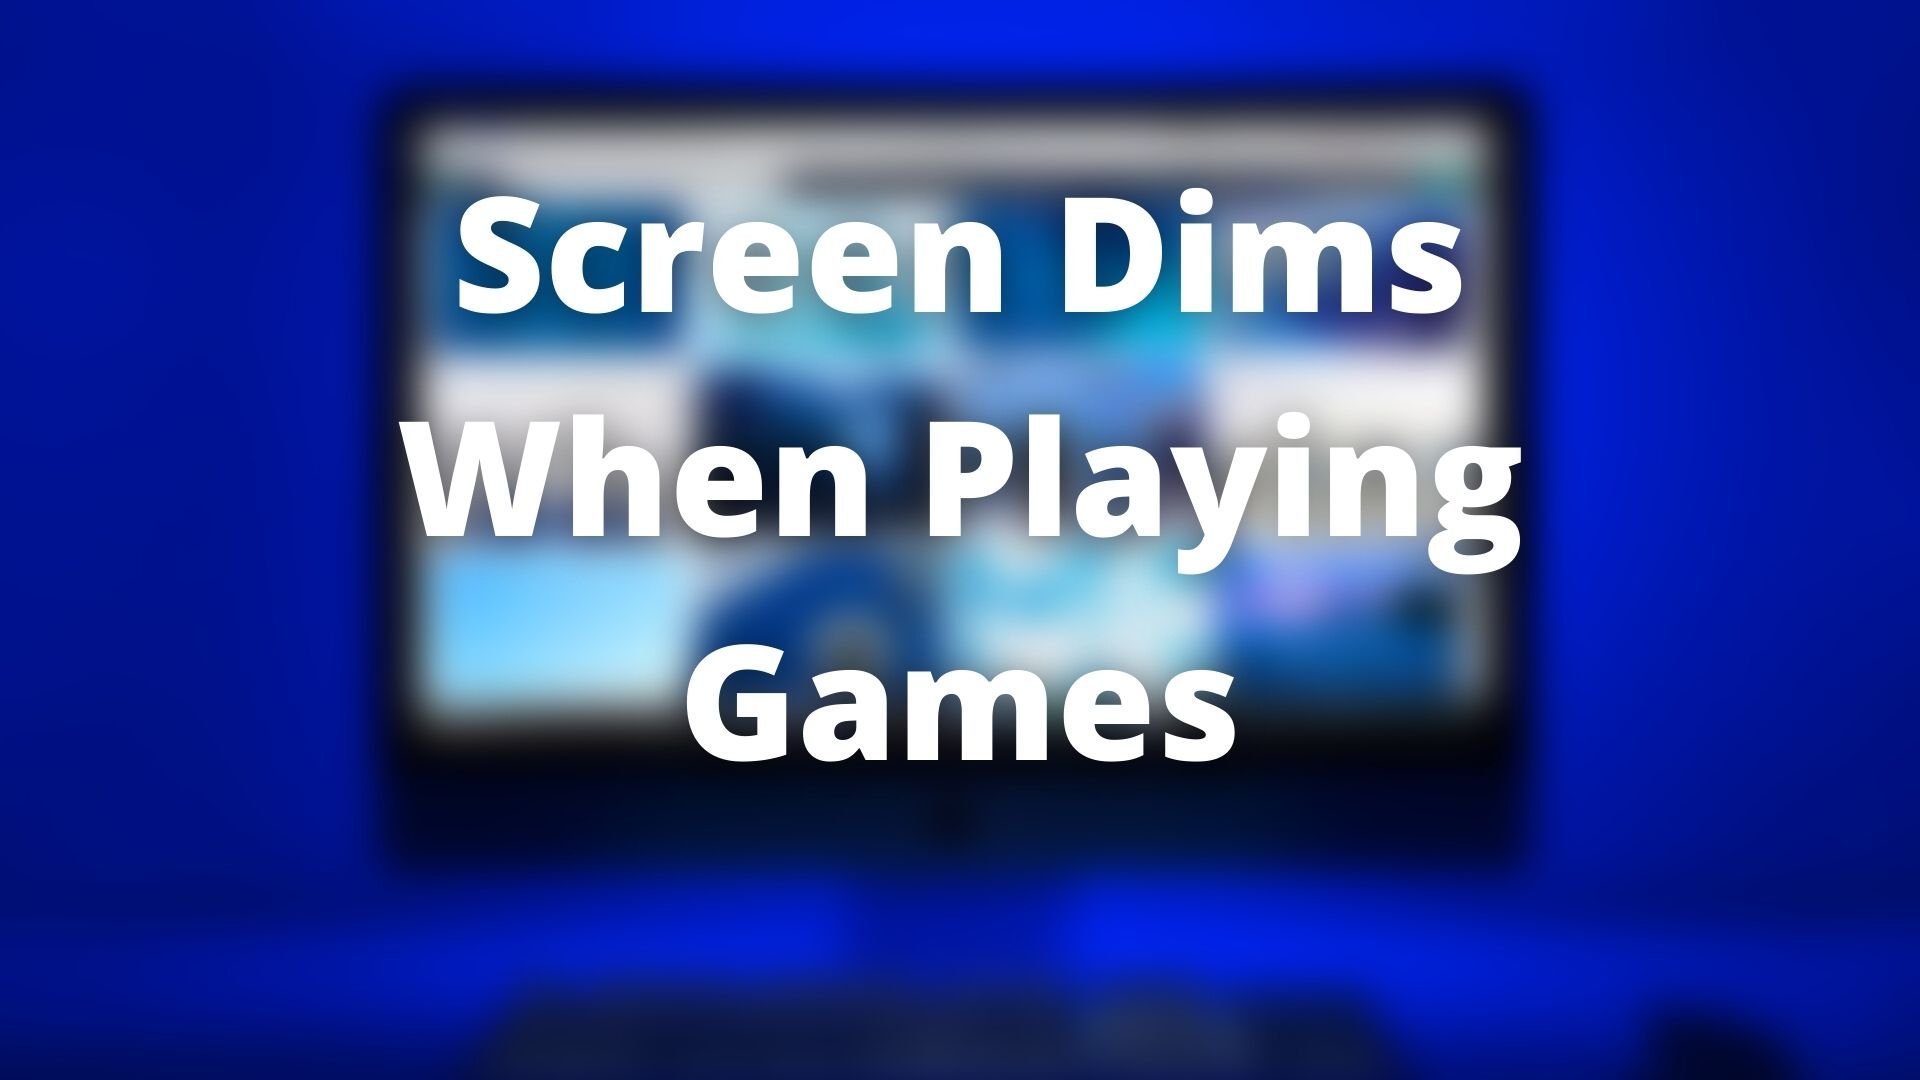 Fix Screen Dims when playing Games on full screen on Windows PC Screen-Dims-When-Playing-Games.jpg